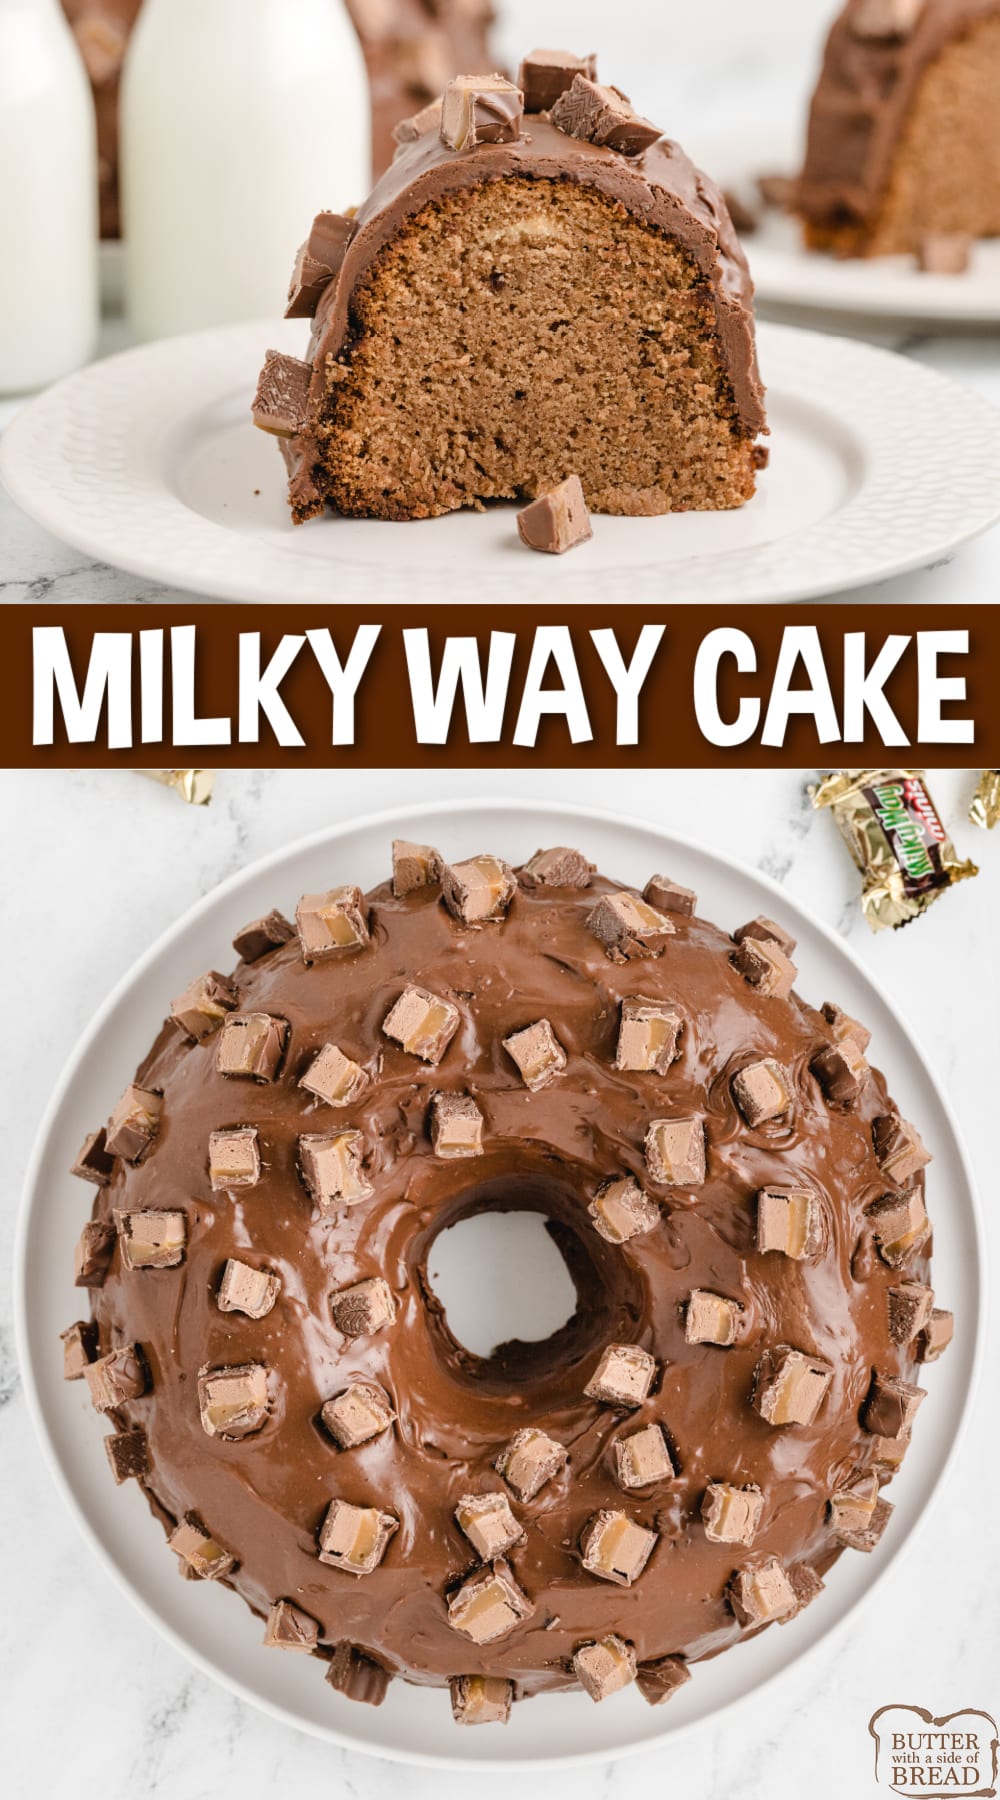 Milky Way Cake is made with melted Milky Way candy bars and topped with a chocolate marshmallow ganache! Perfect bundt cake recipe for leftover Halloween candy, holidays, or any time you need a delicious dessert recipe.